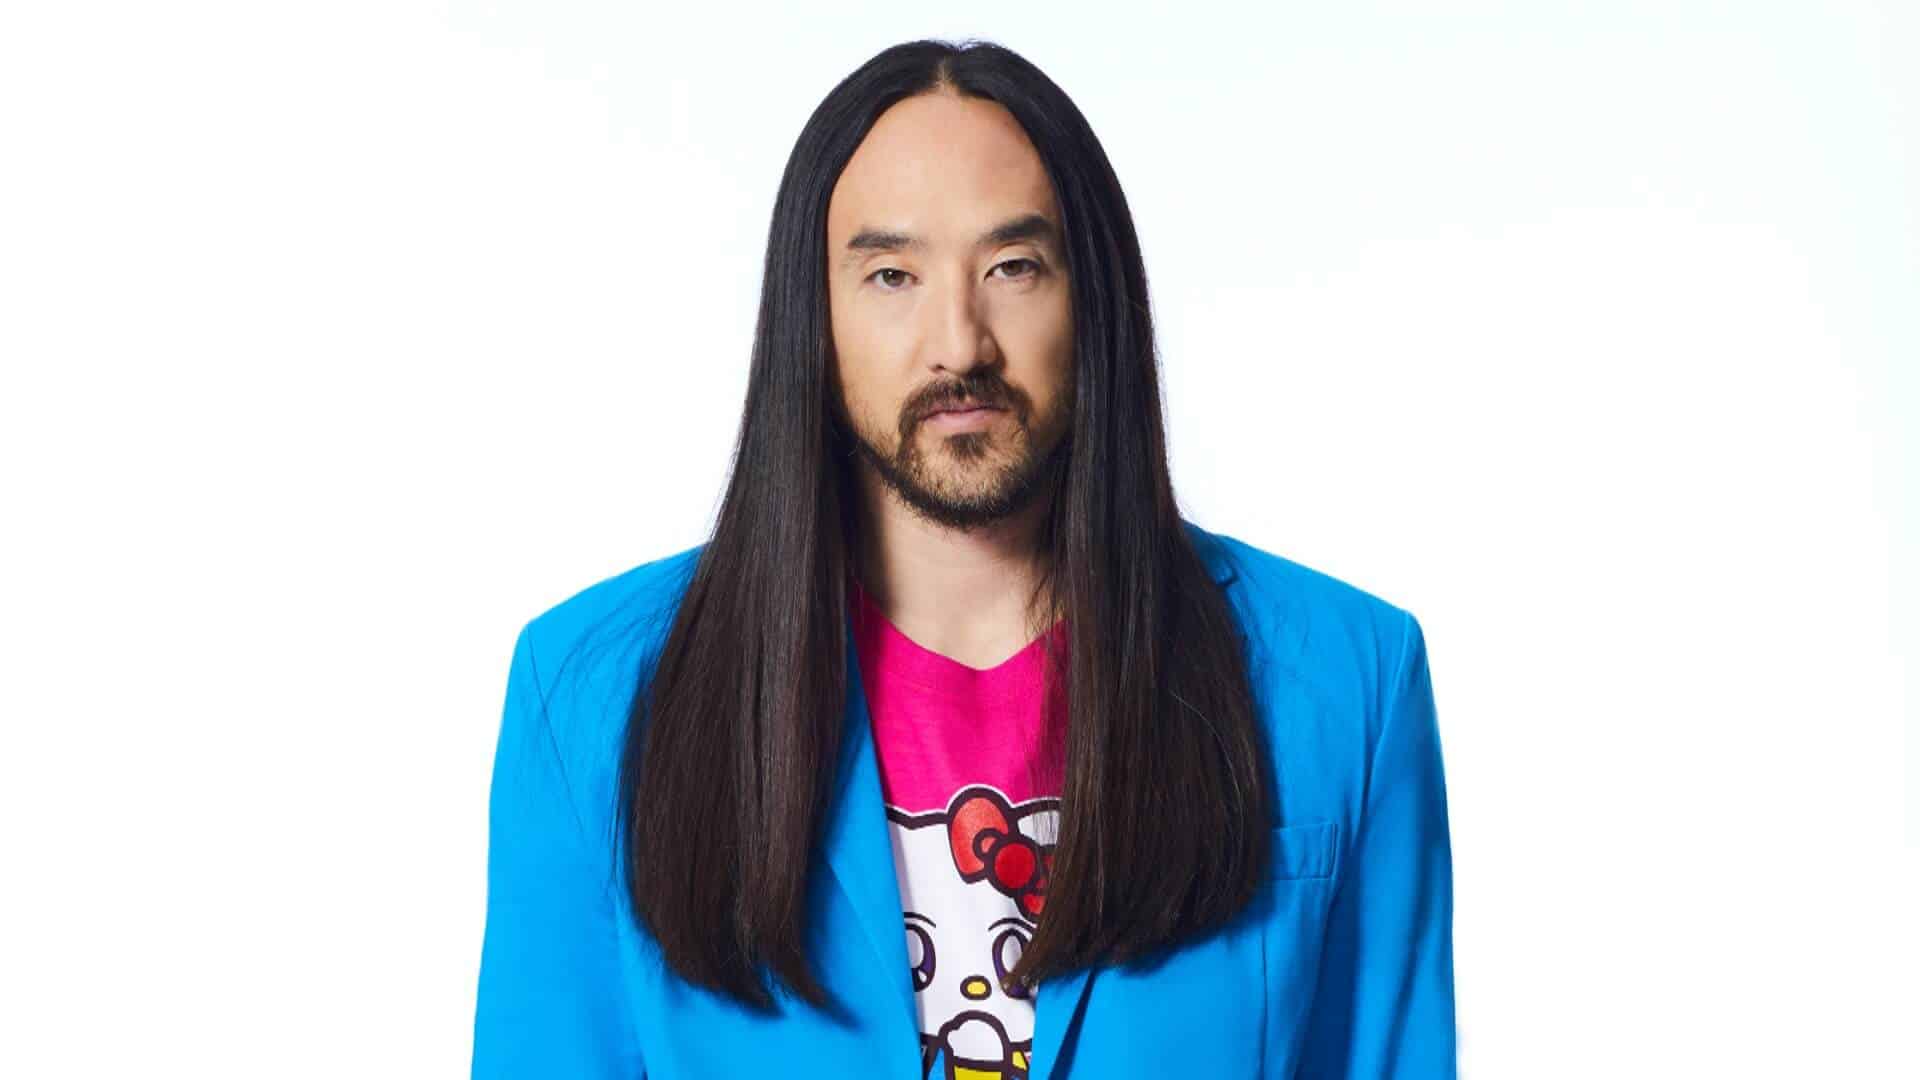 Relive Steve Aoki’s 2008 Essential Mix for his birthday